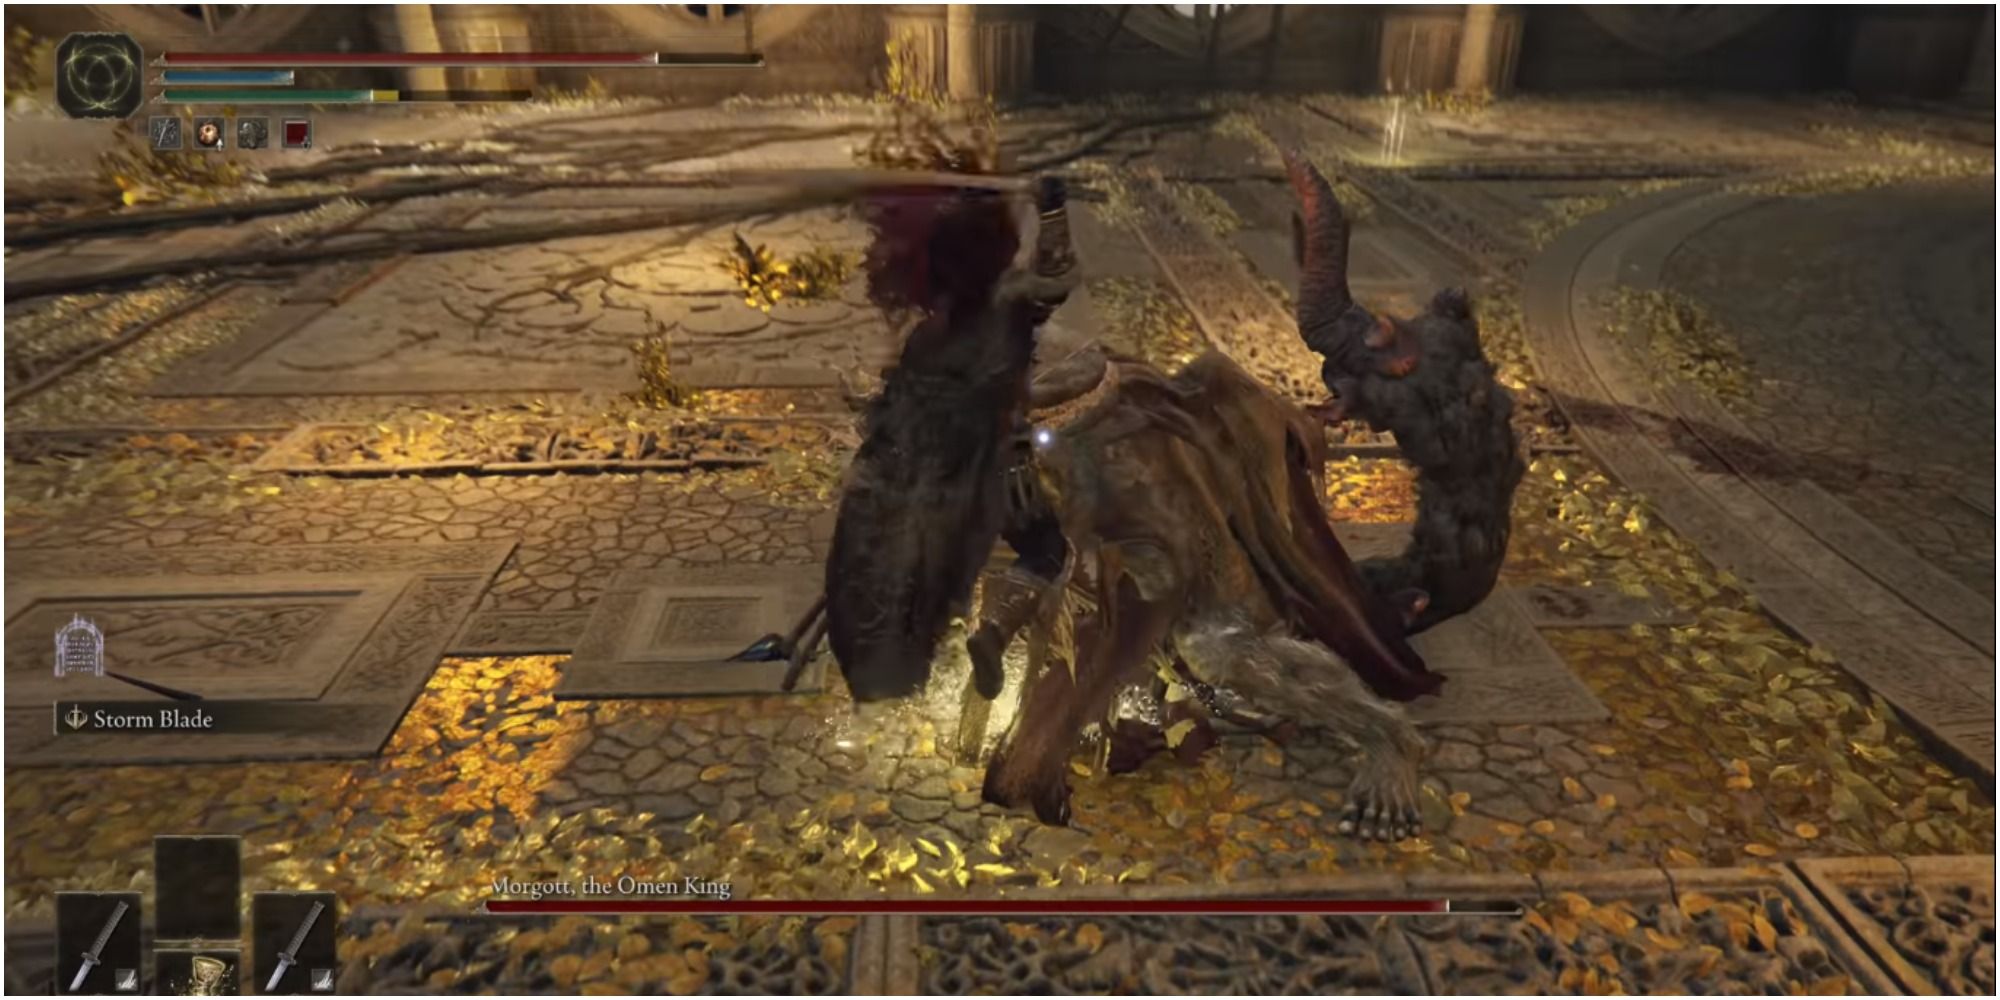 The player using a melee weapon against Morgott.